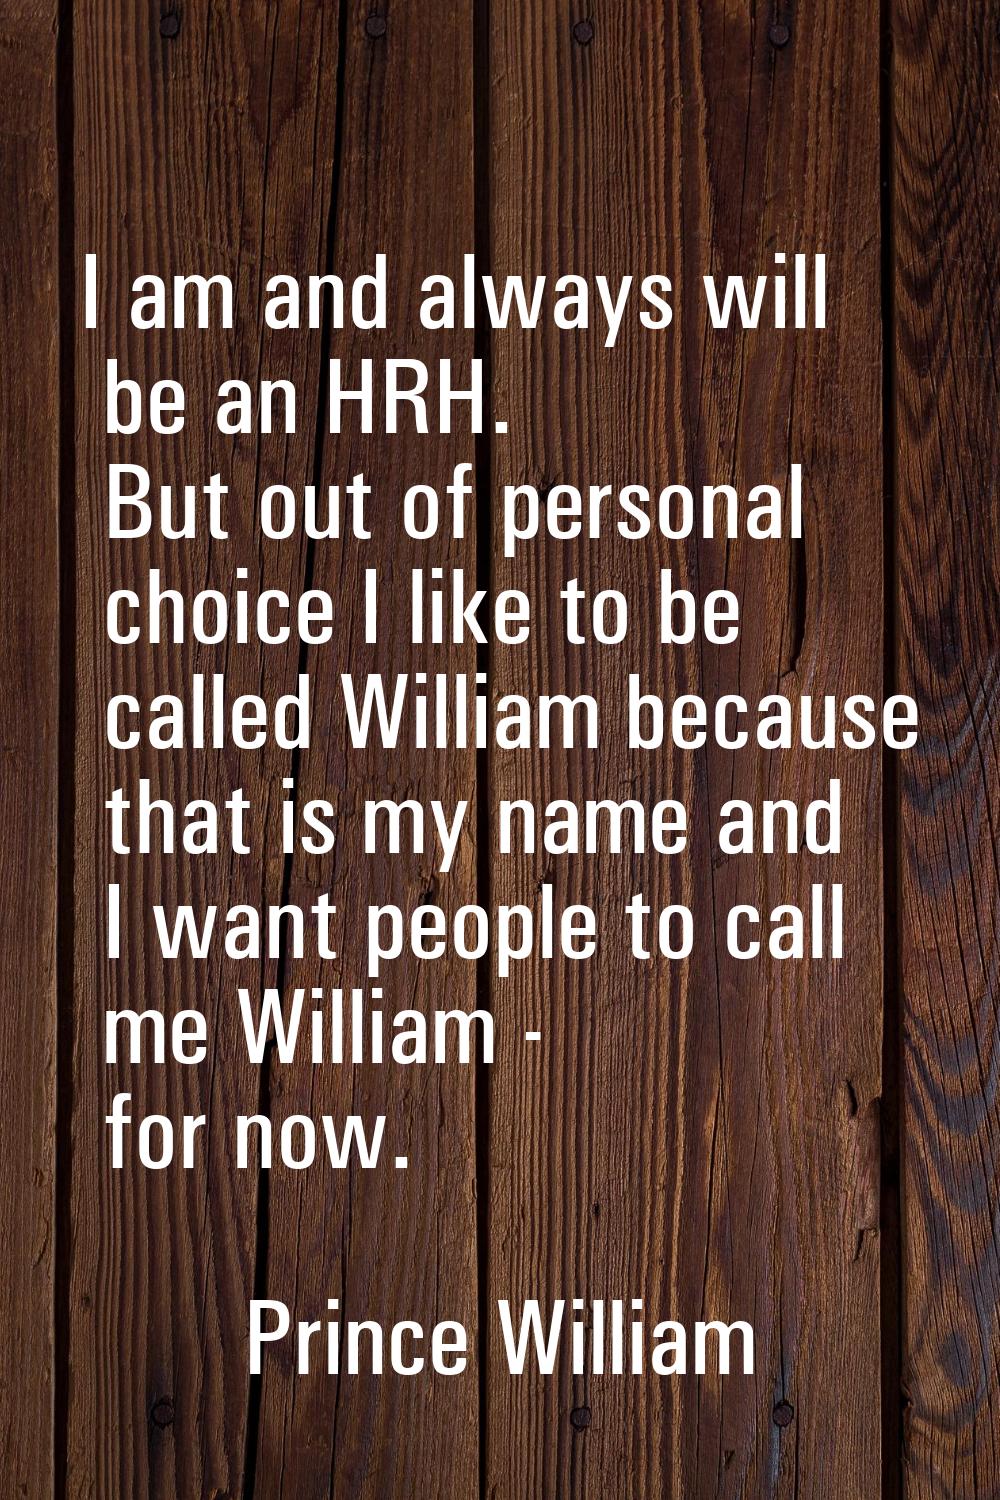 I am and always will be an HRH. But out of personal choice I like to be called William because that